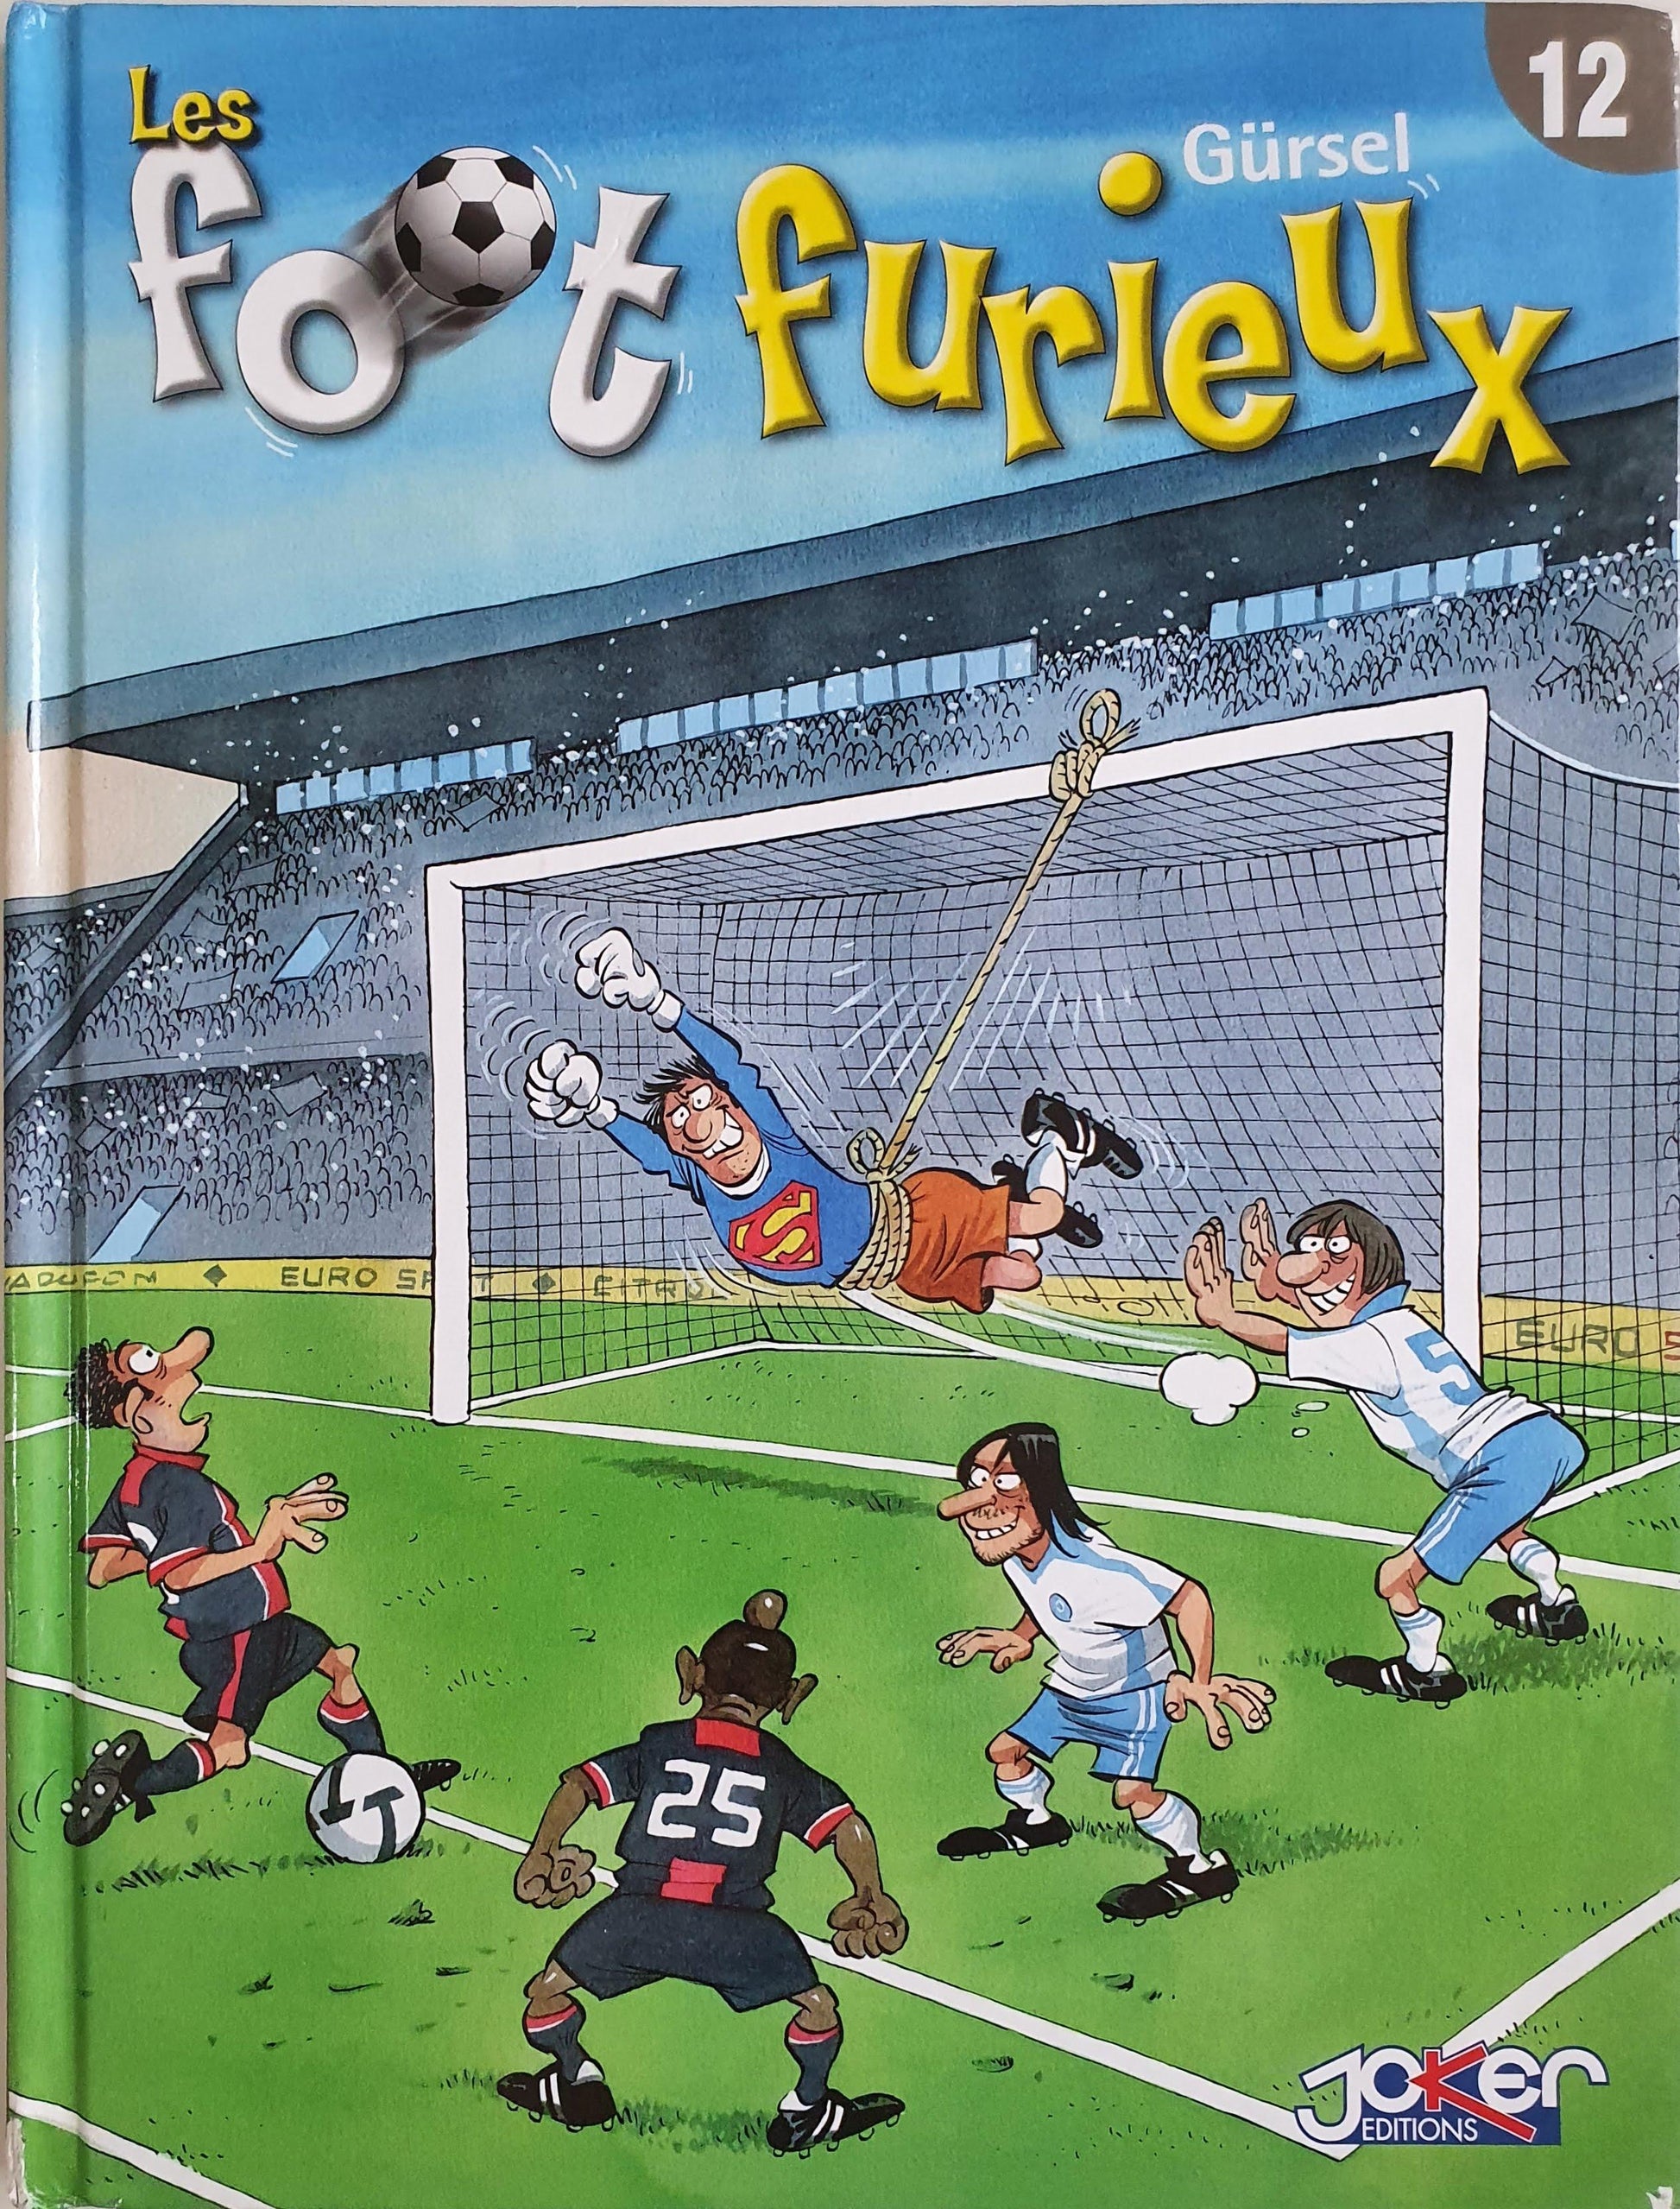 Les foot furieux Volume 12 Like New Les foot furieux  (6070066446521)